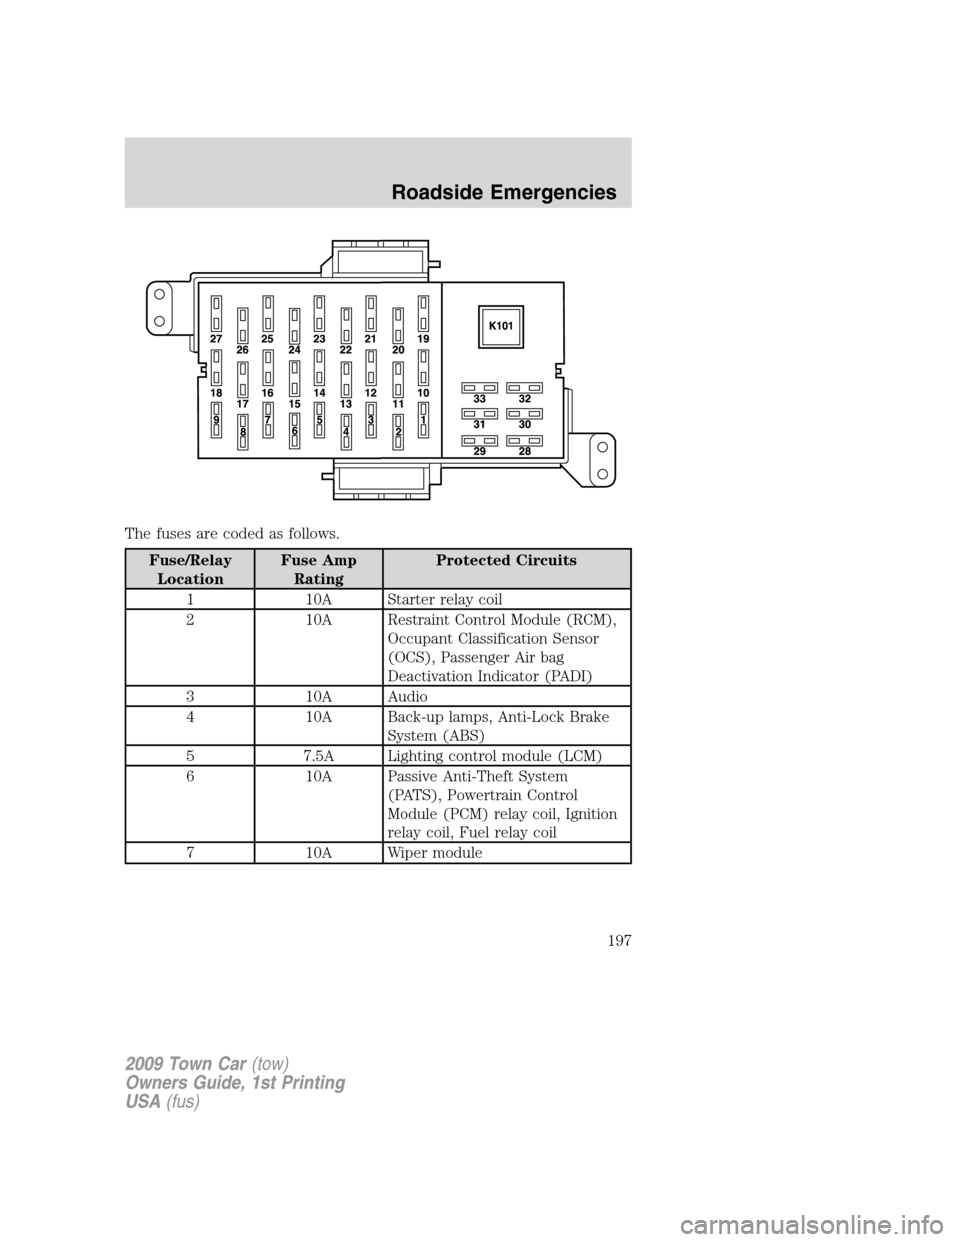 LINCOLN TOWN CAR 2009 User Guide The fuses are coded as follows.
Fuse/Relay
LocationFuse Amp
RatingProtected Circuits
1 10A Starter relay coil
2 10A Restraint Control Module (RCM),
Occupant Classification Sensor
(OCS), Passenger Air 